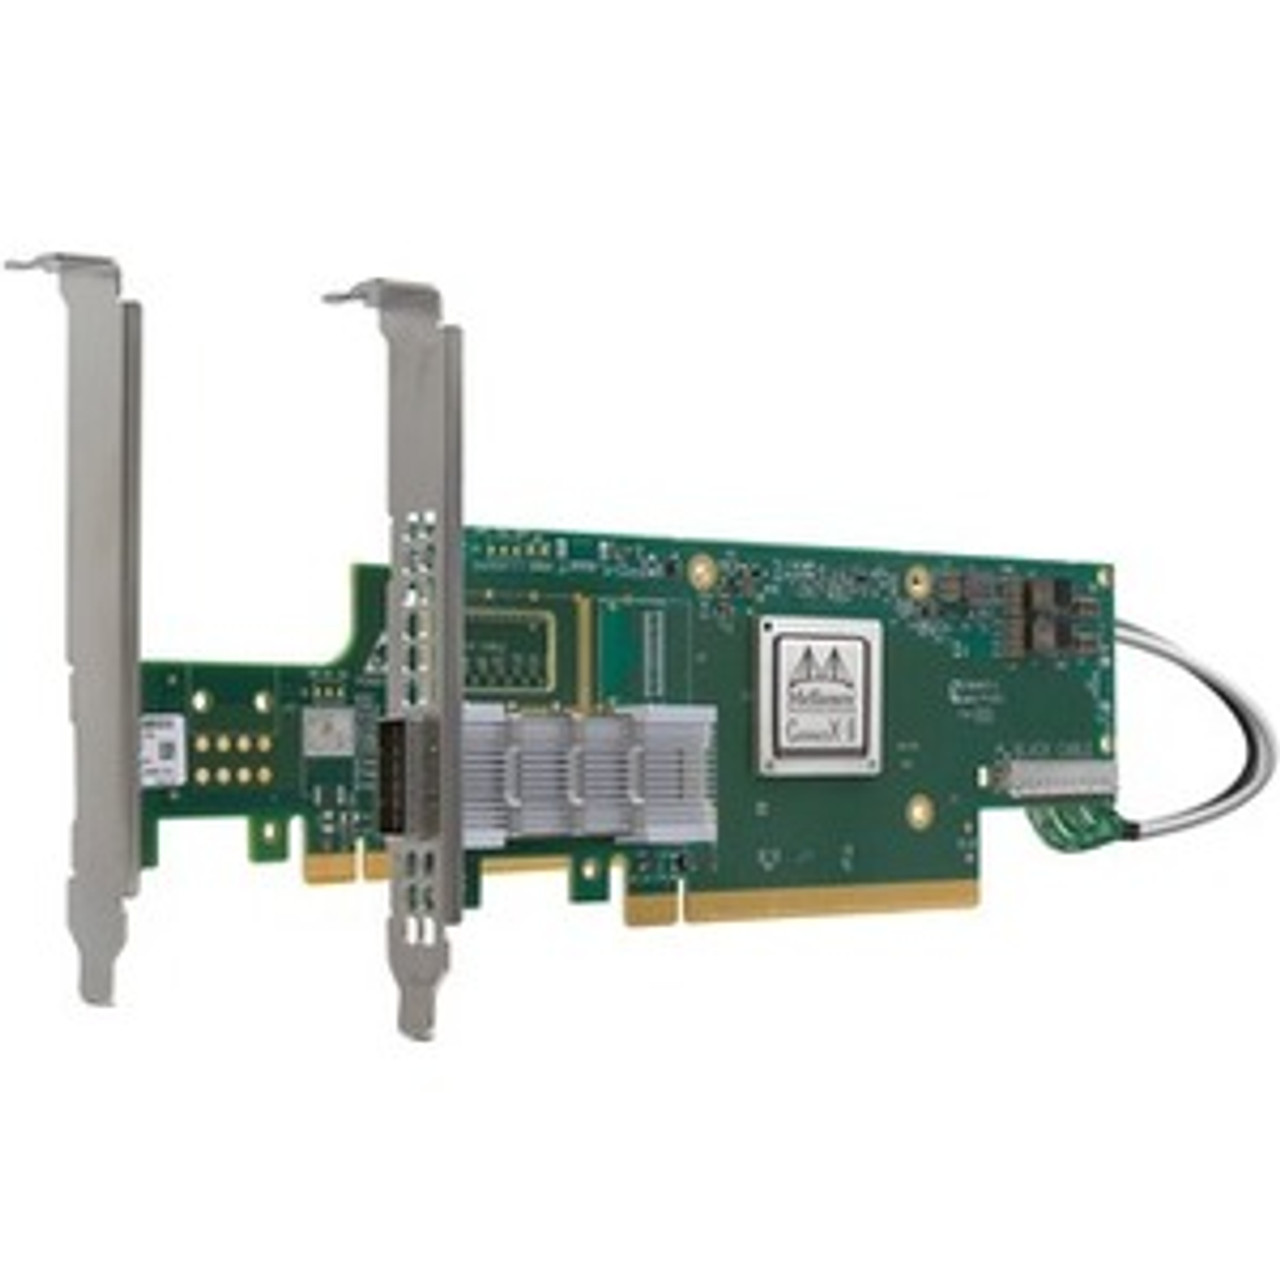 MCX653105A-EFAT NVIDIA ConnectX-6 VPI Adapter Card HDR100 EDR InfiniBand and 100GbE Single-Port QSFP56 PCIe3.0/4.0 Socket Direct 2x8 in a Row Tall Bracket